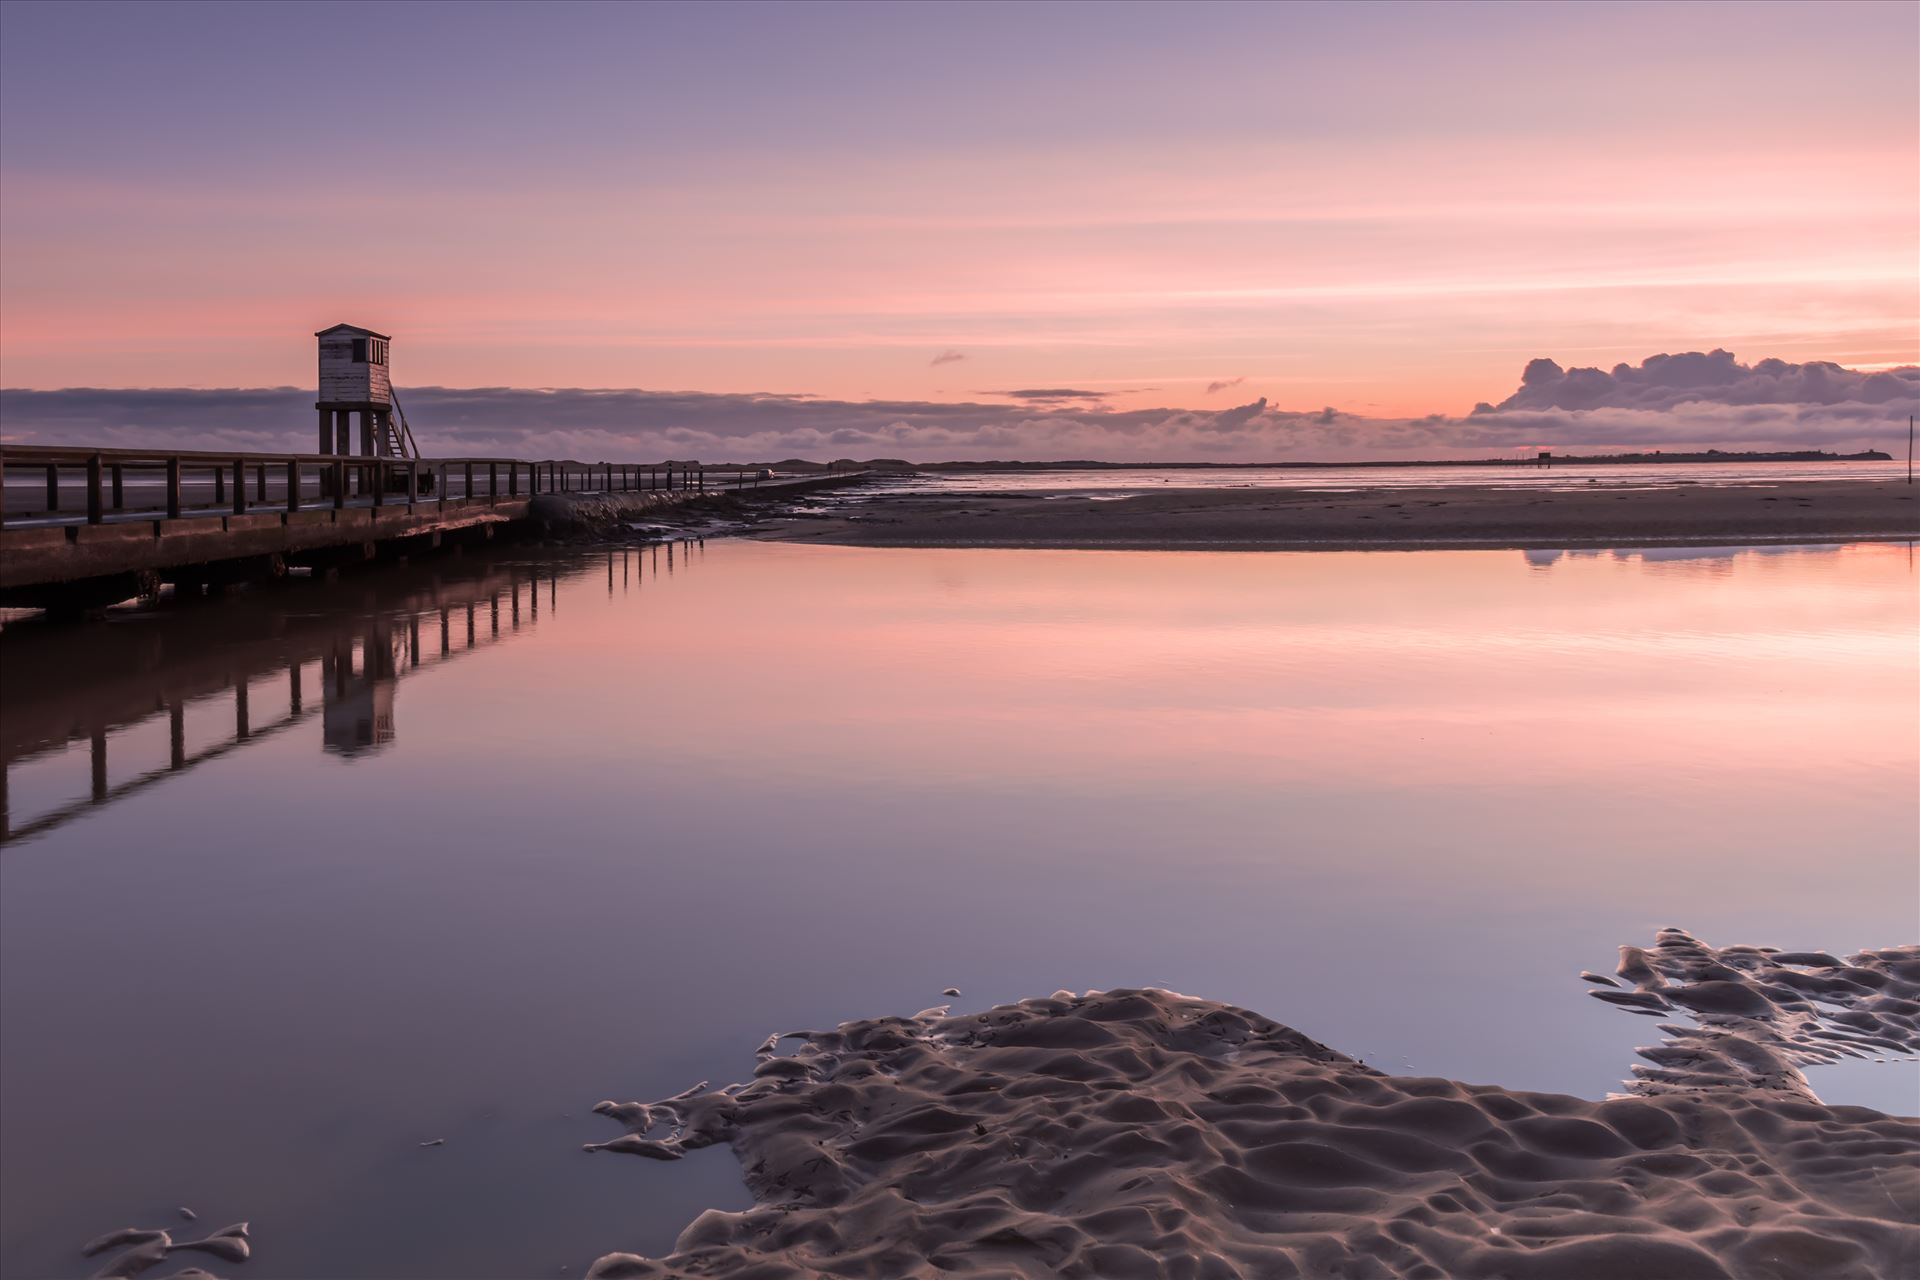 Holy Island causeway - The Holy Island of Lindisfarne is a tidal island off the northeast coast of England. It is also known just as Holy Island & is now a popular destination for visitors to the area. by philreay